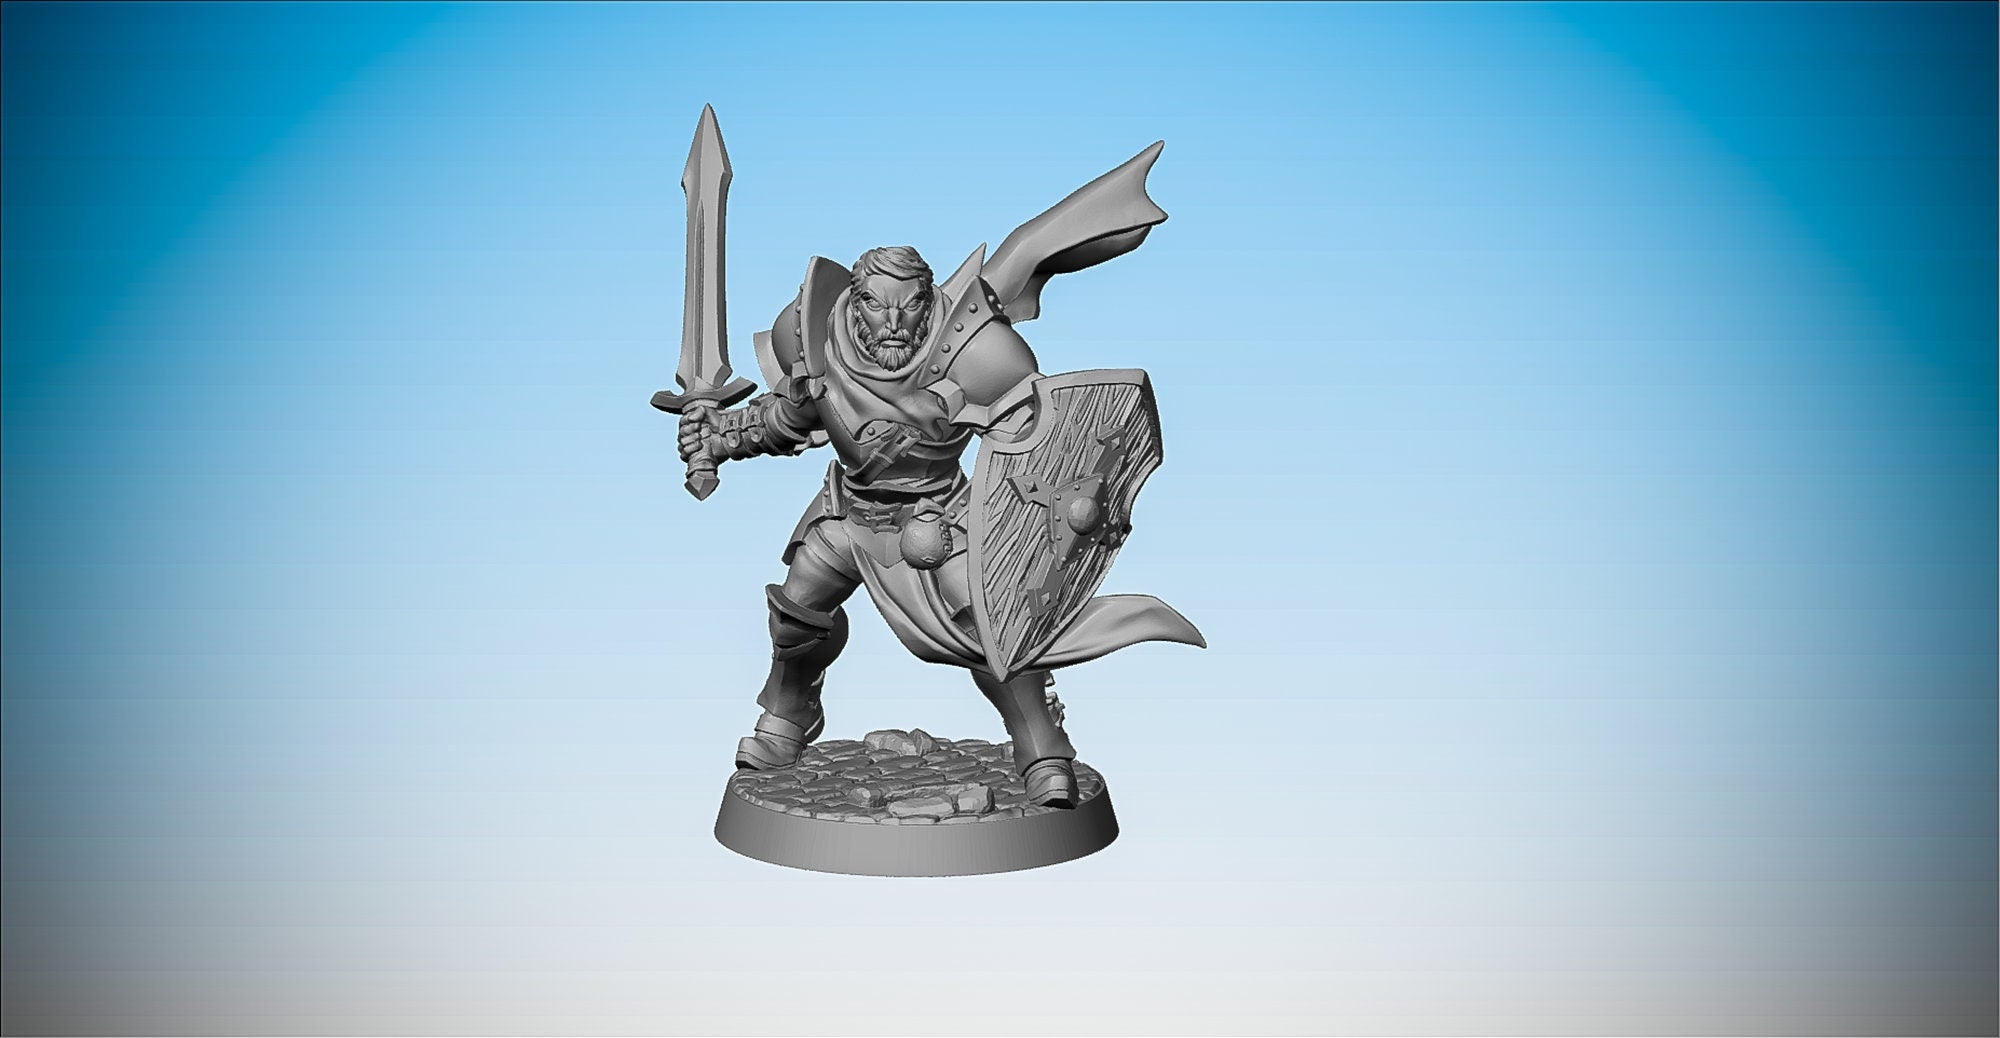 HUMAN WARRIOR "Sword & Shield" | Dungeons and Dragons | DnD | Pathfinder | Tabletop | RPG | Hero Size | 28 mm-Role Playing Miniatures